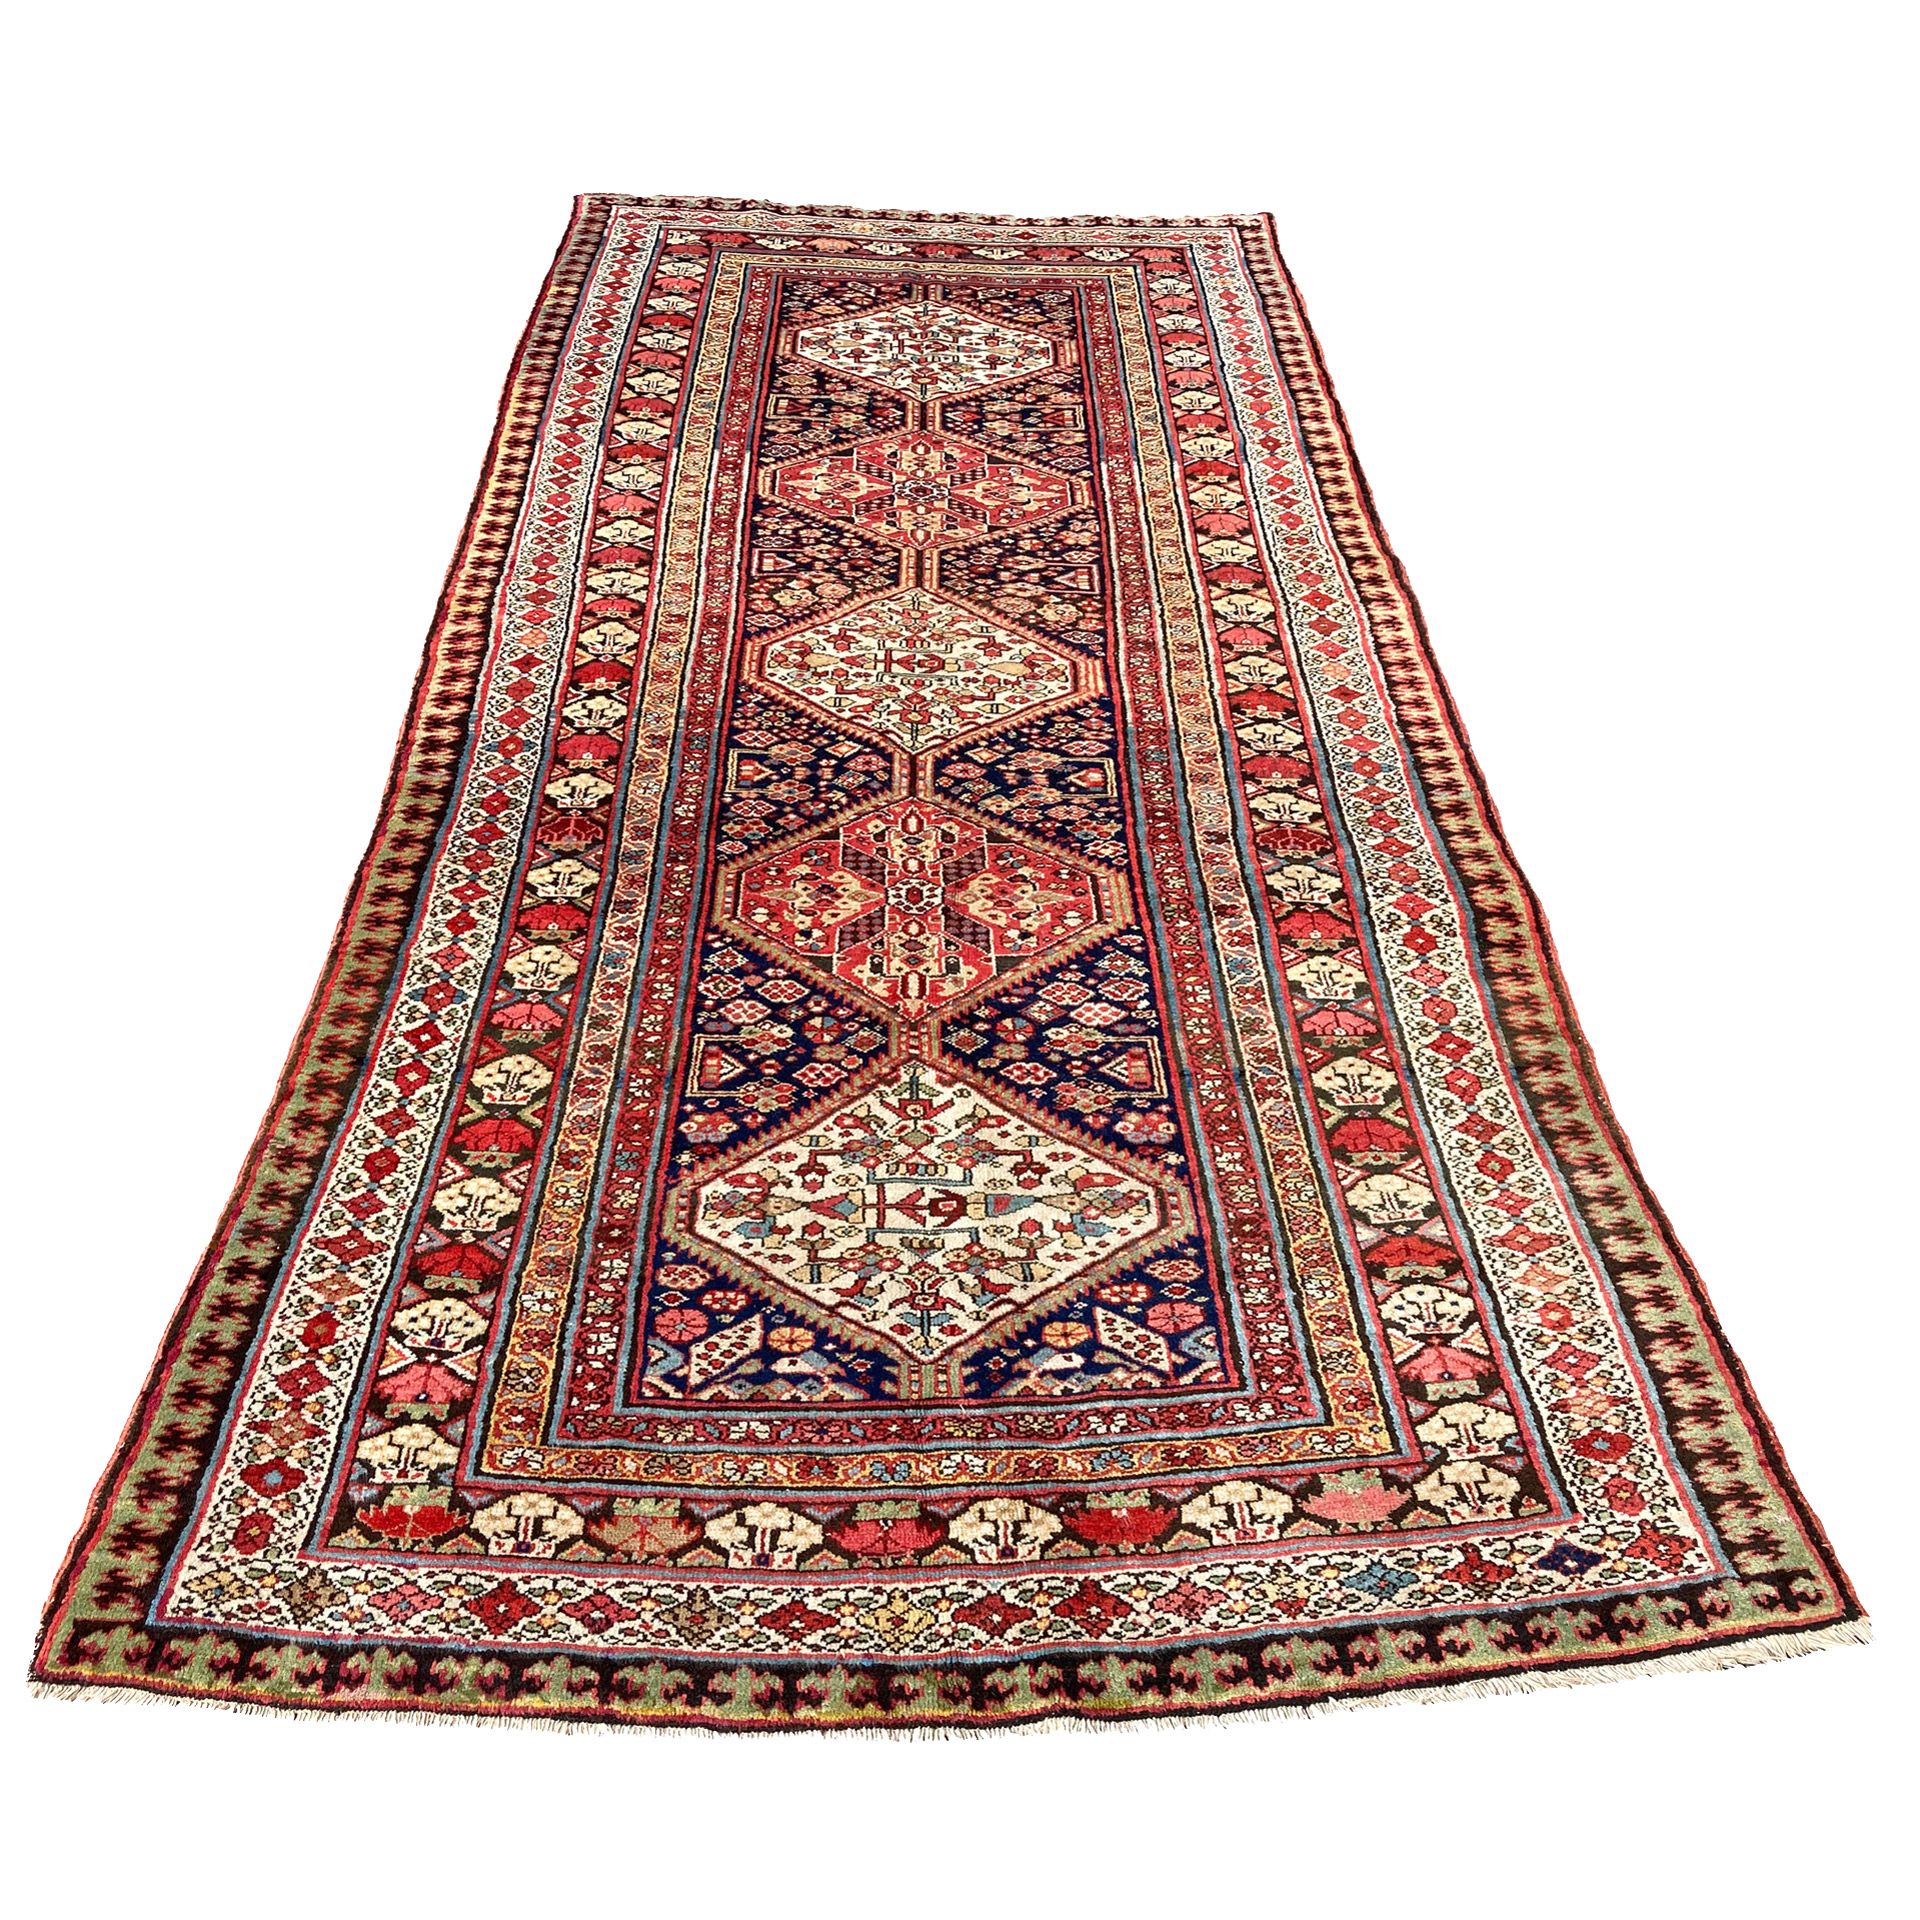 Antique northwest Persian village rug, possibly Serab, with a navy field and a series of bric red and ivory medallions, circa 1895 - Douglas Stock Gallery, antique Oriental rugs, South Natick, Natick, Newton, Brookline, Boston,MA area, antique Persian rugs New England